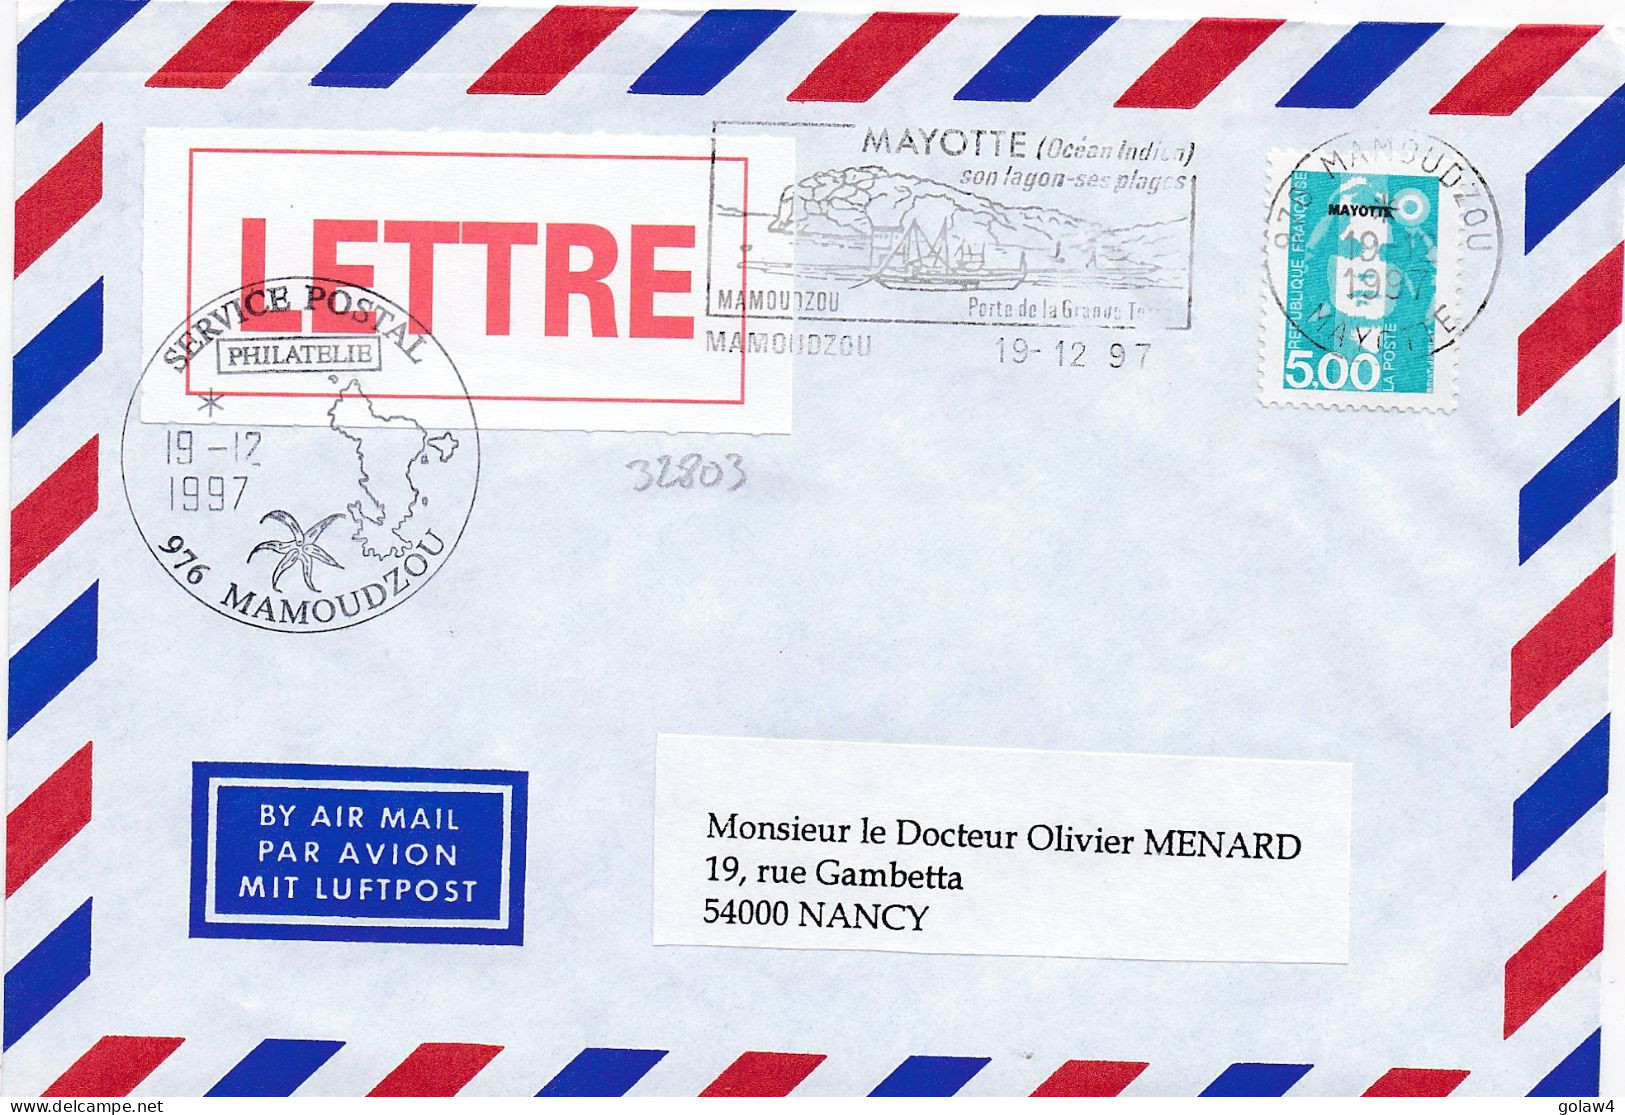 32803# MARIANNE BRIAD 5,00 Francs LETTRE Obl 976 MAMOUDZOU MAYOTTE 1997 SON LAGON SES PLAGES NANCY MEURTHE MOSELLE - Lettres & Documents